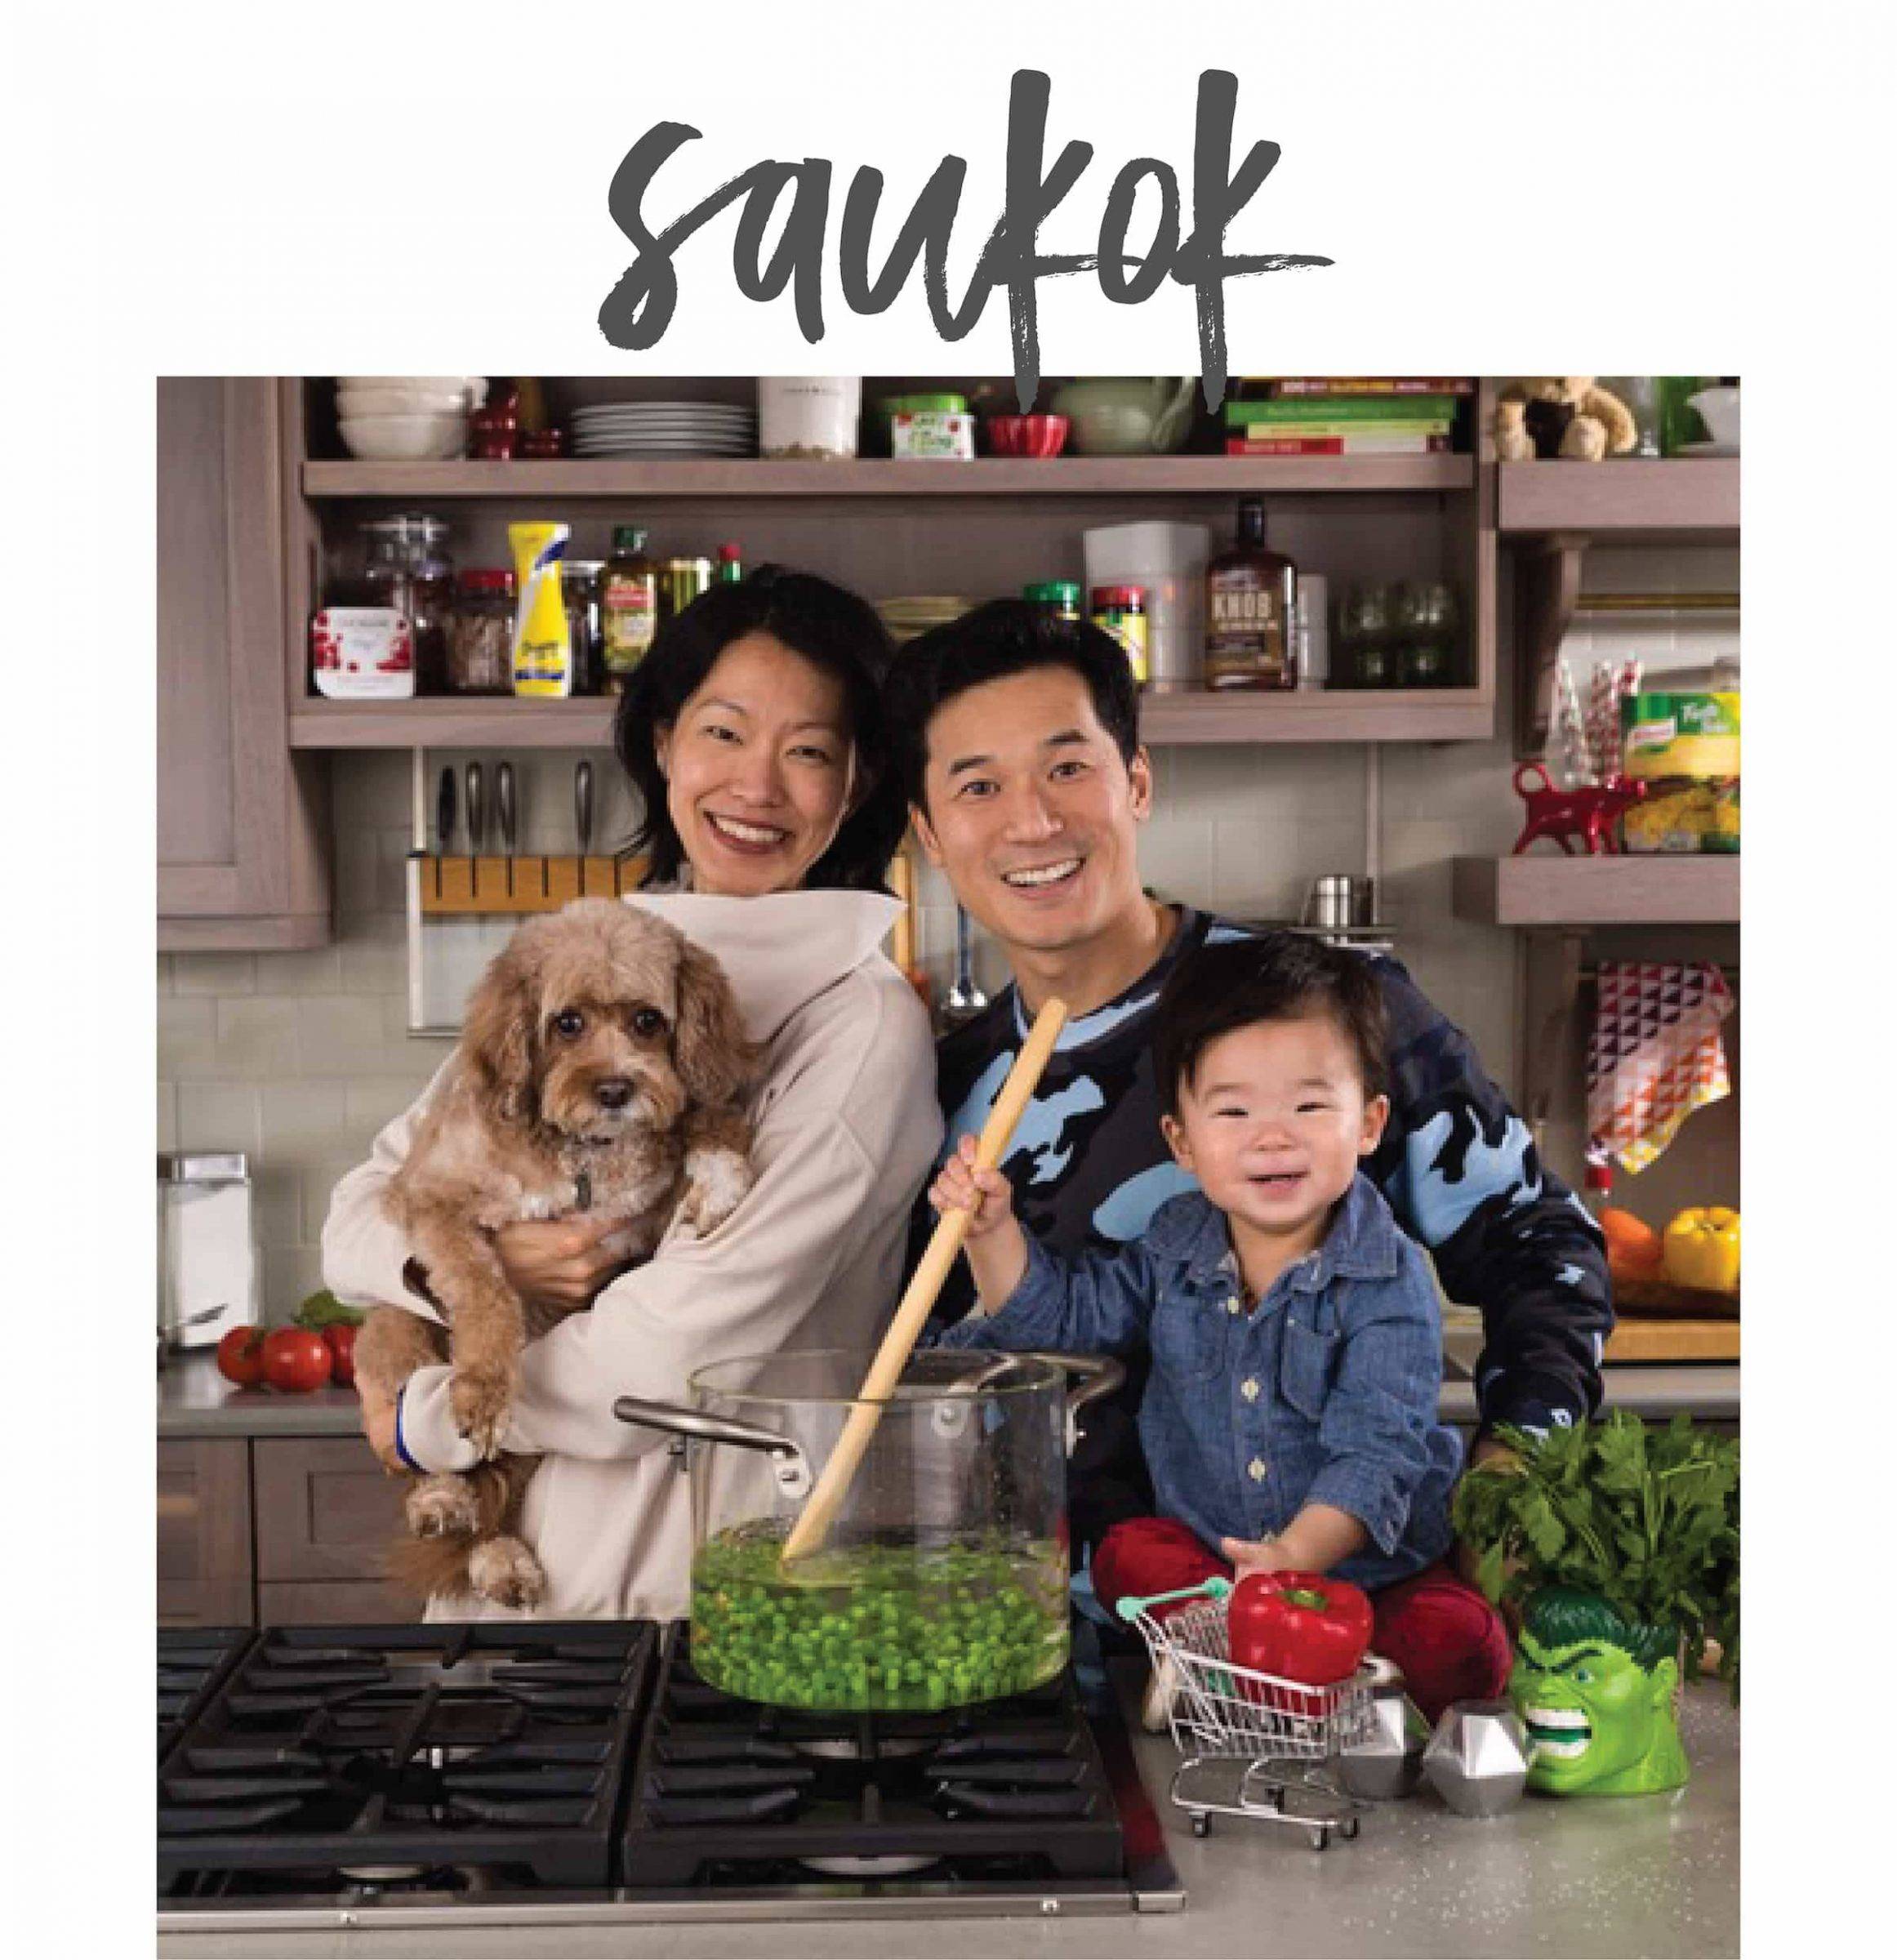 A man, woman, and child in a kitchen with their dog.